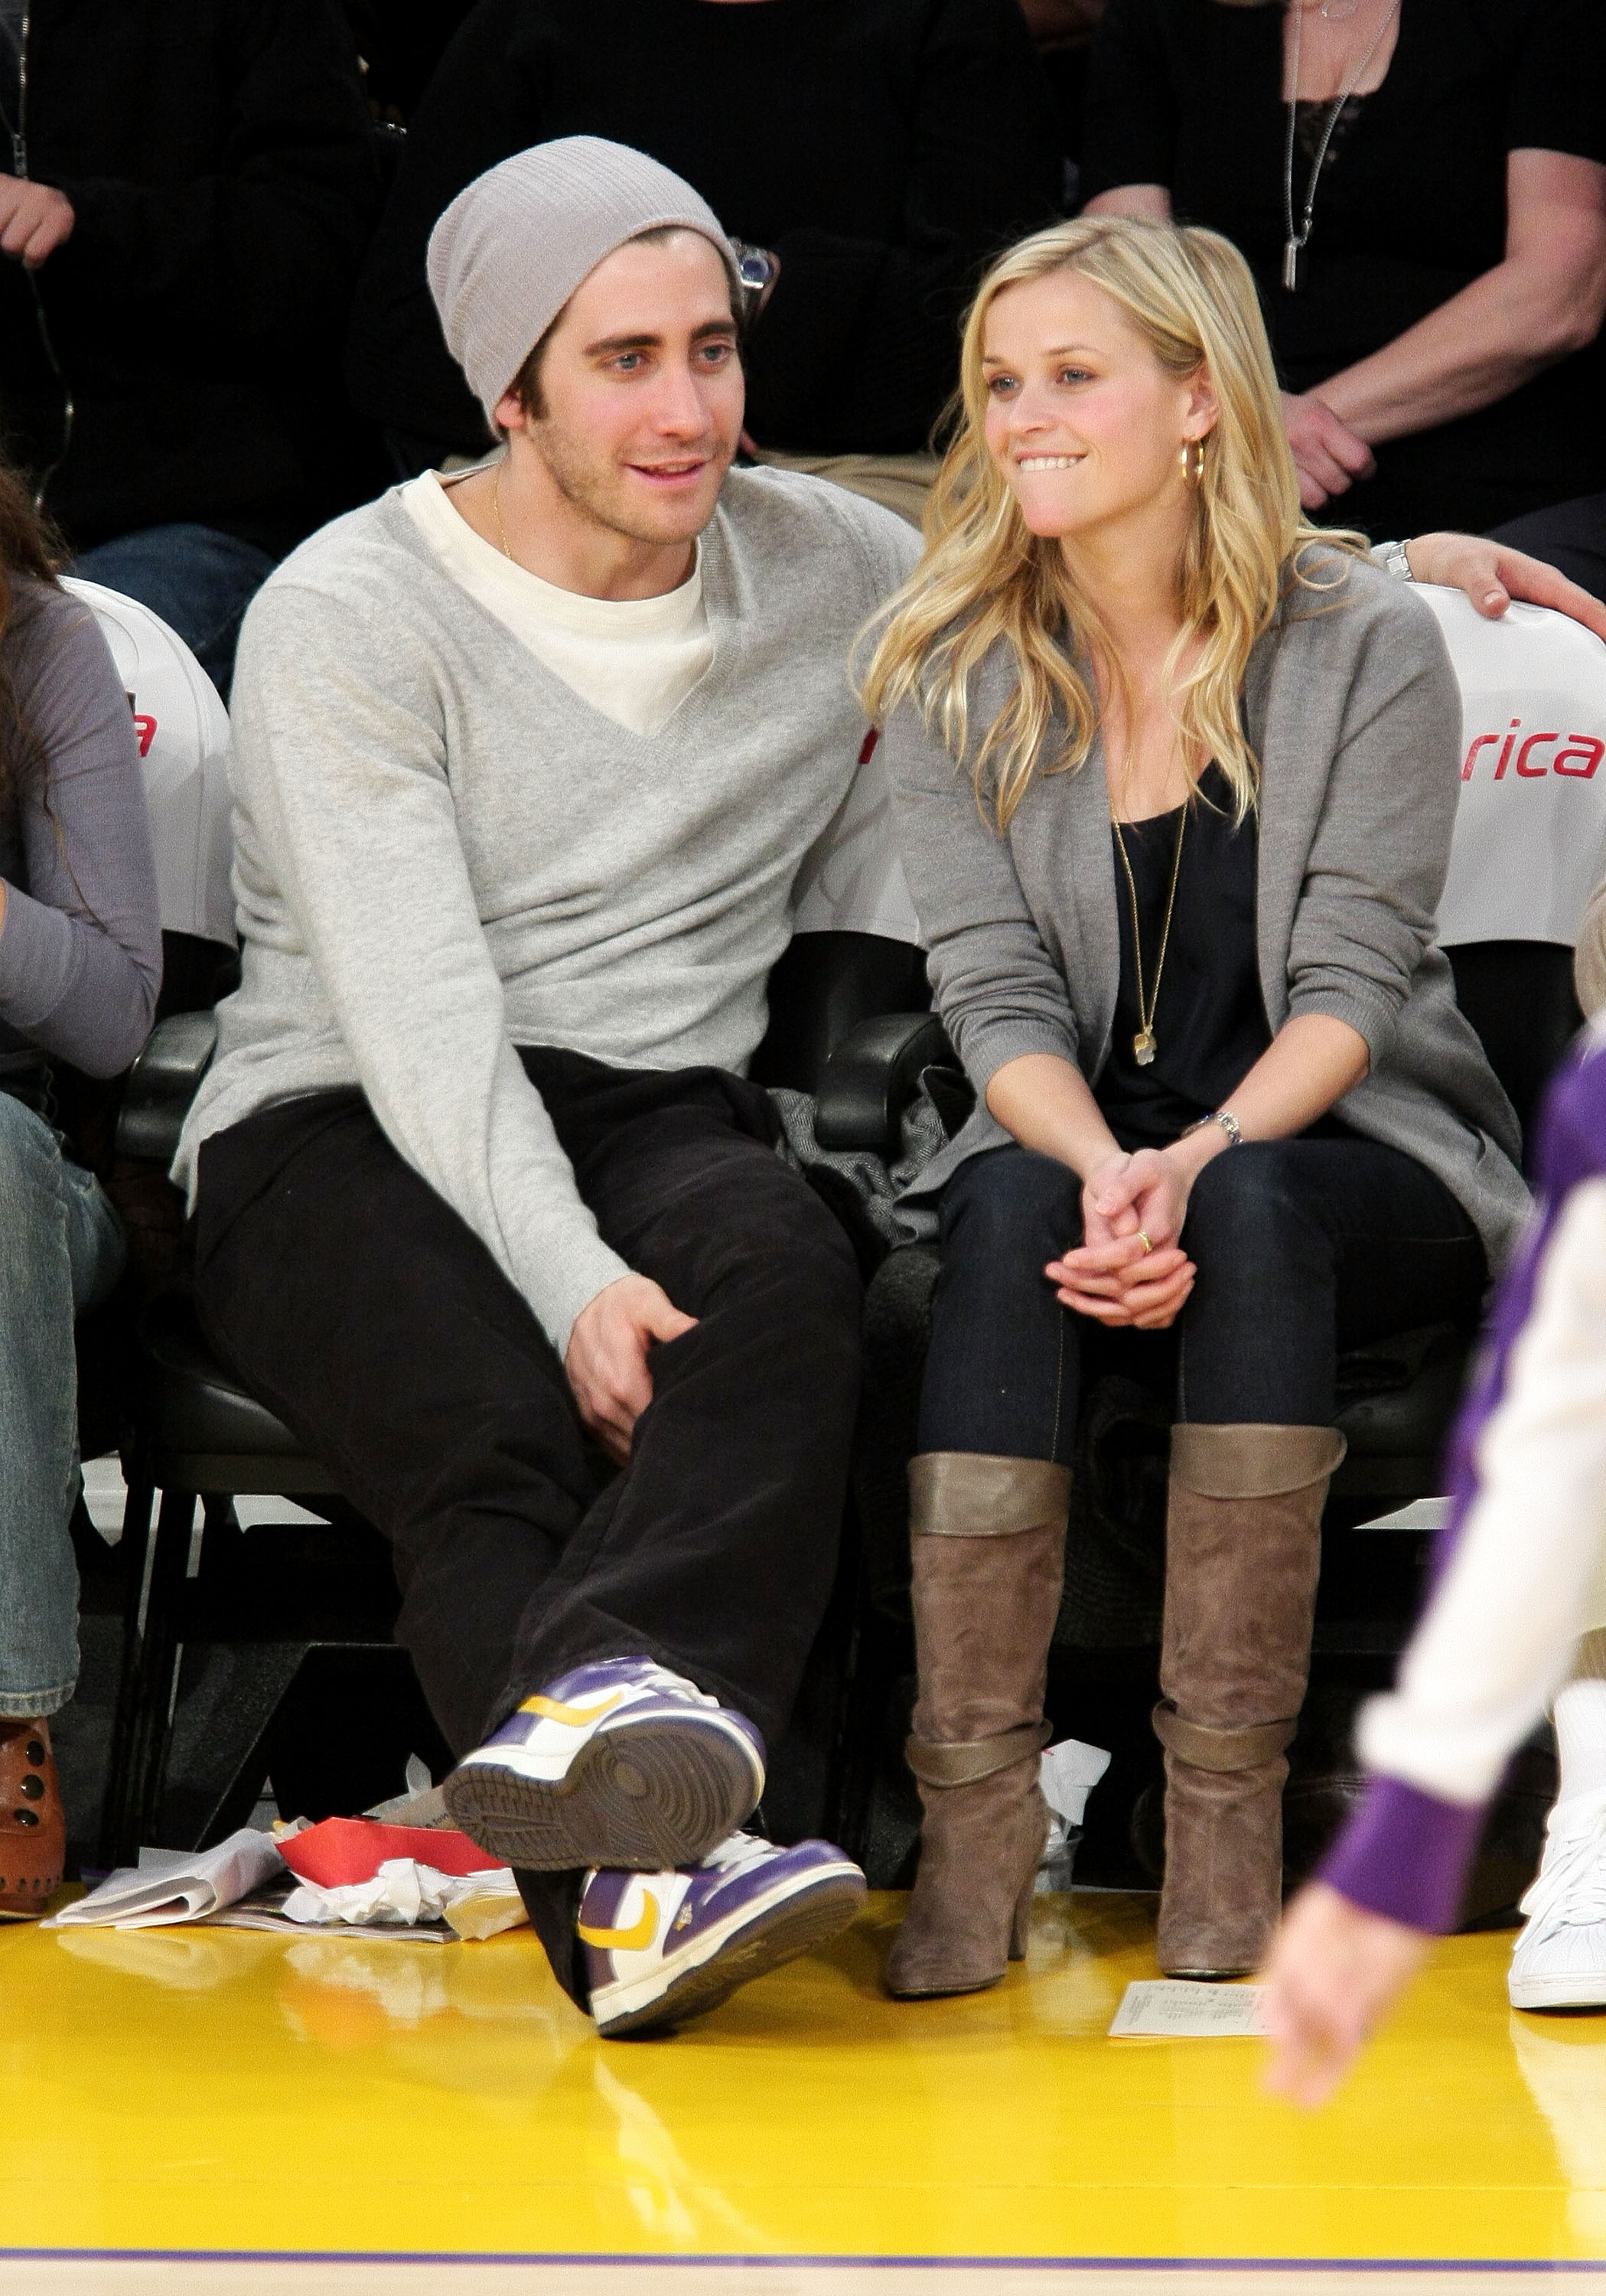 Jake Gyllenhaal and Reese Witherspoon pictured at a Lakers game in January 2009